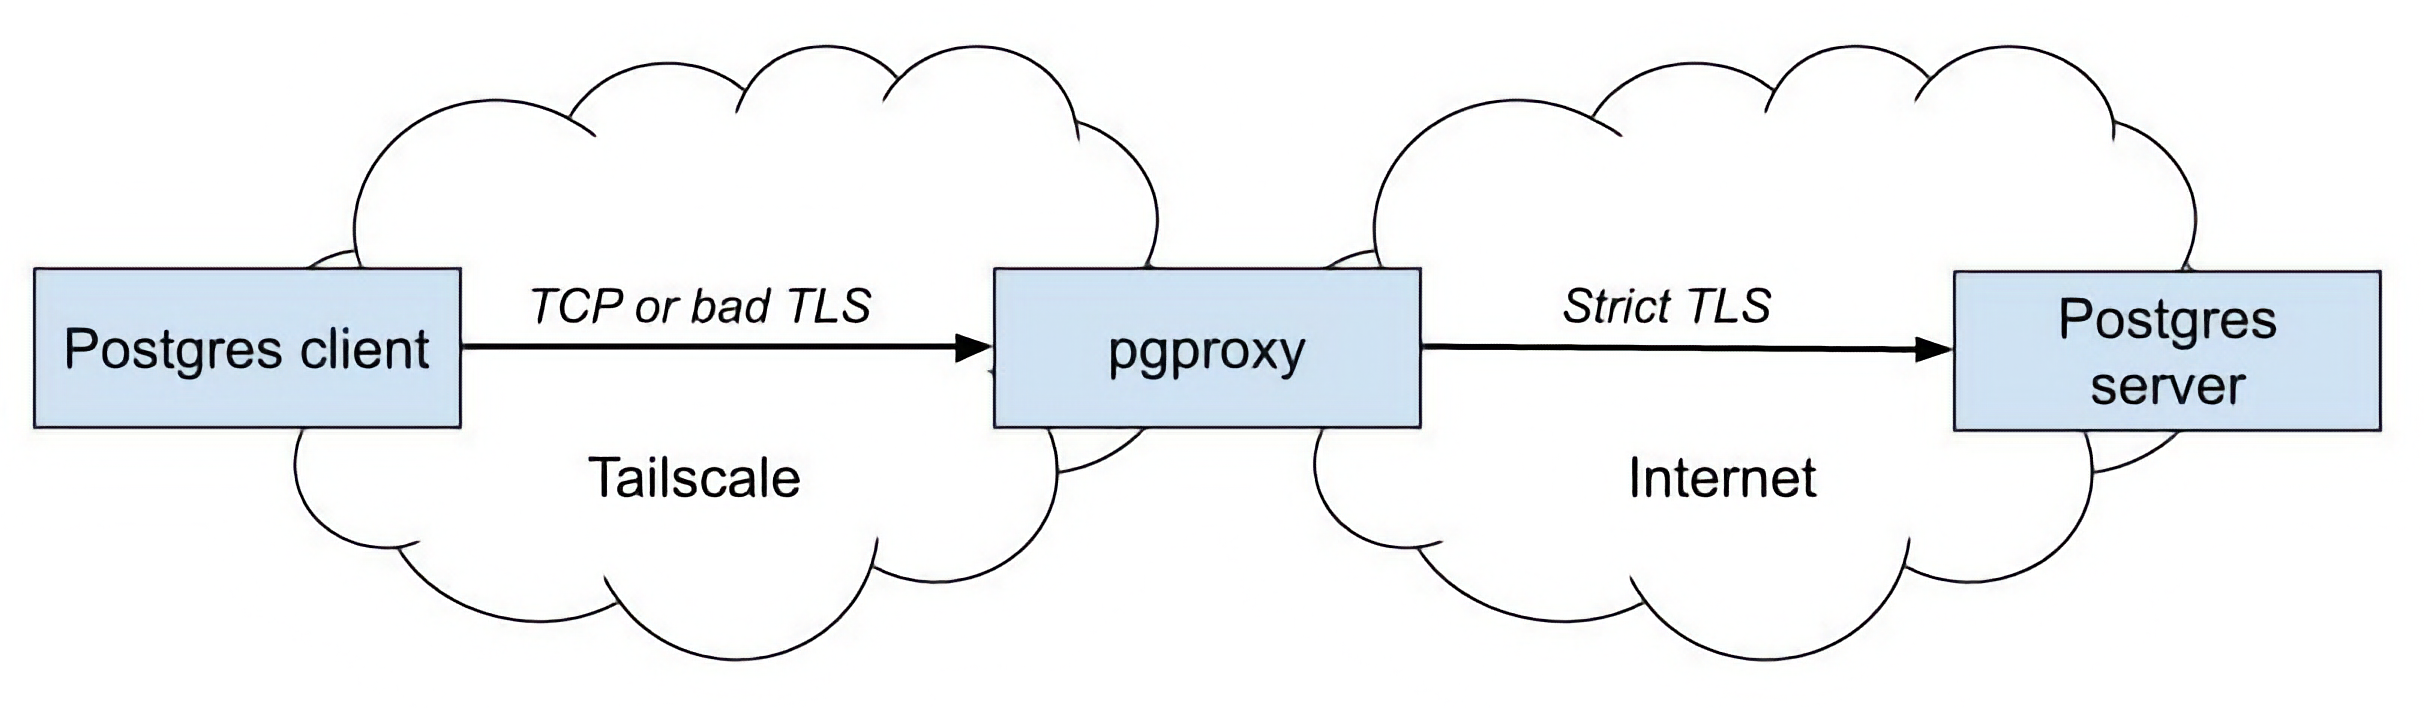 A postgres client connecting over Tailscale to pgproxy, using any security settings. Pgproxy is connecting over the internet to a Postgres server, using strict TLS settings.